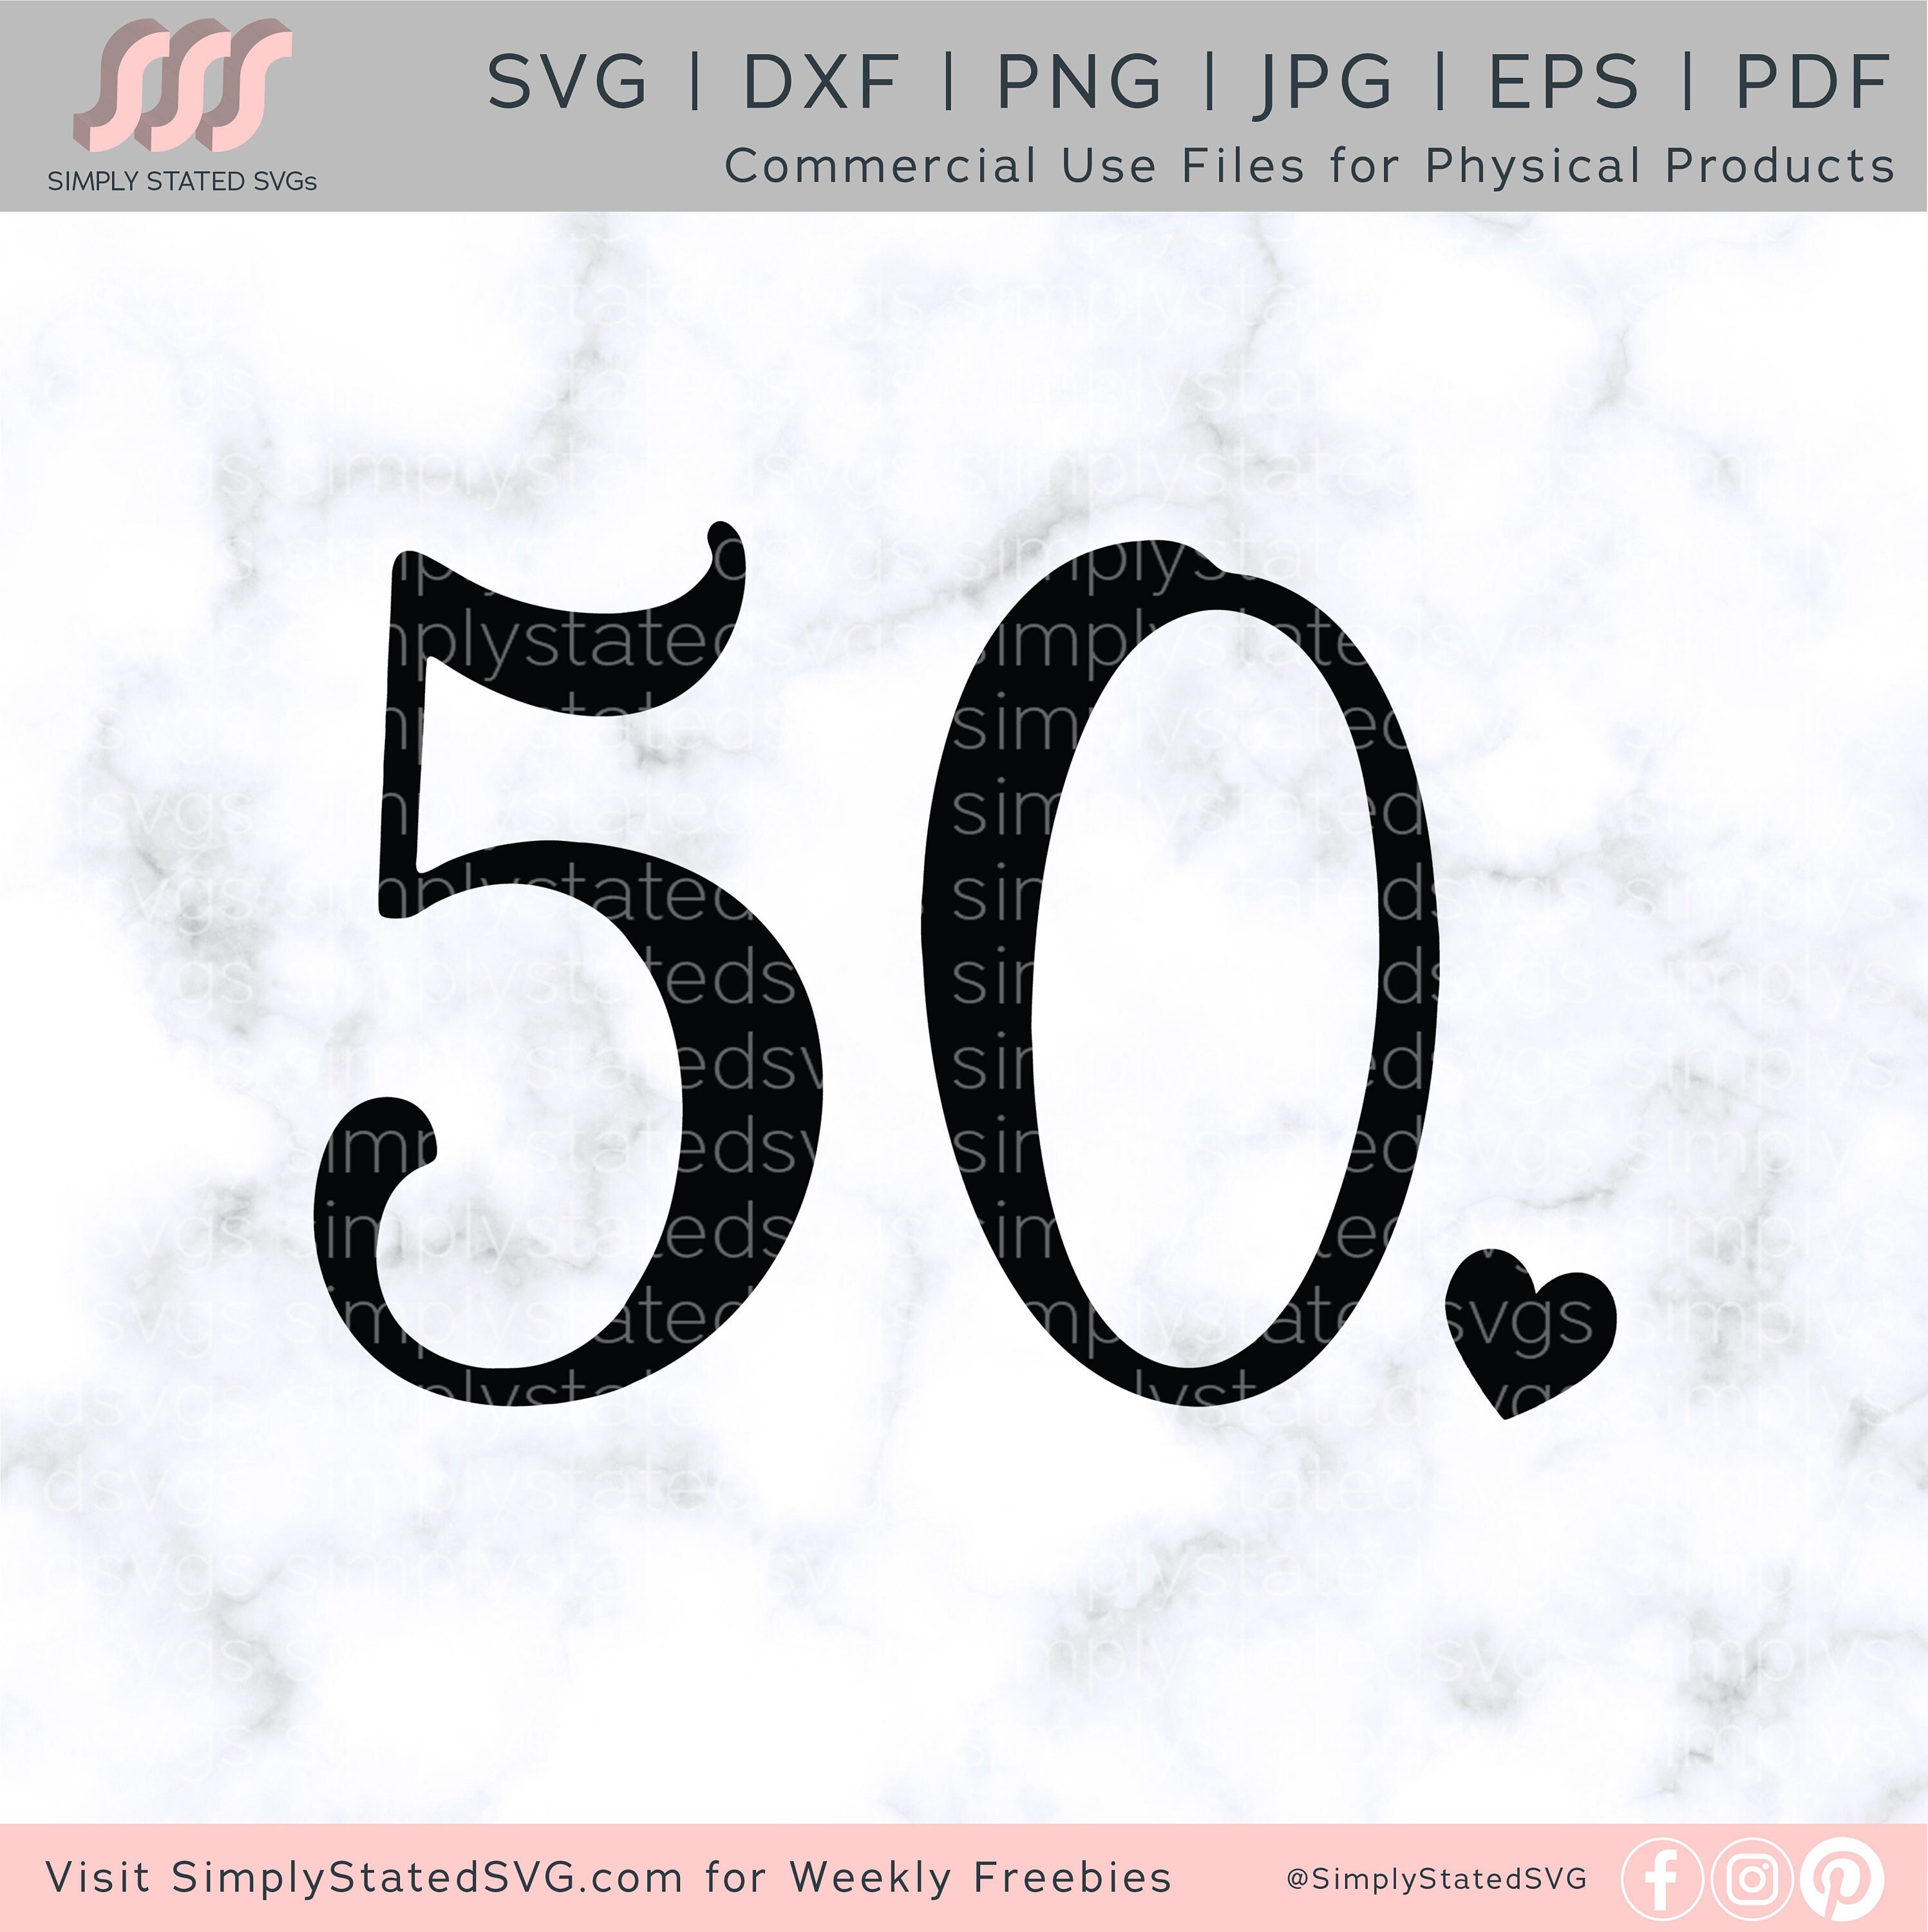 $50 Dollar Price Icon. 50 USD Price Tag Royalty Free SVG, Cliparts